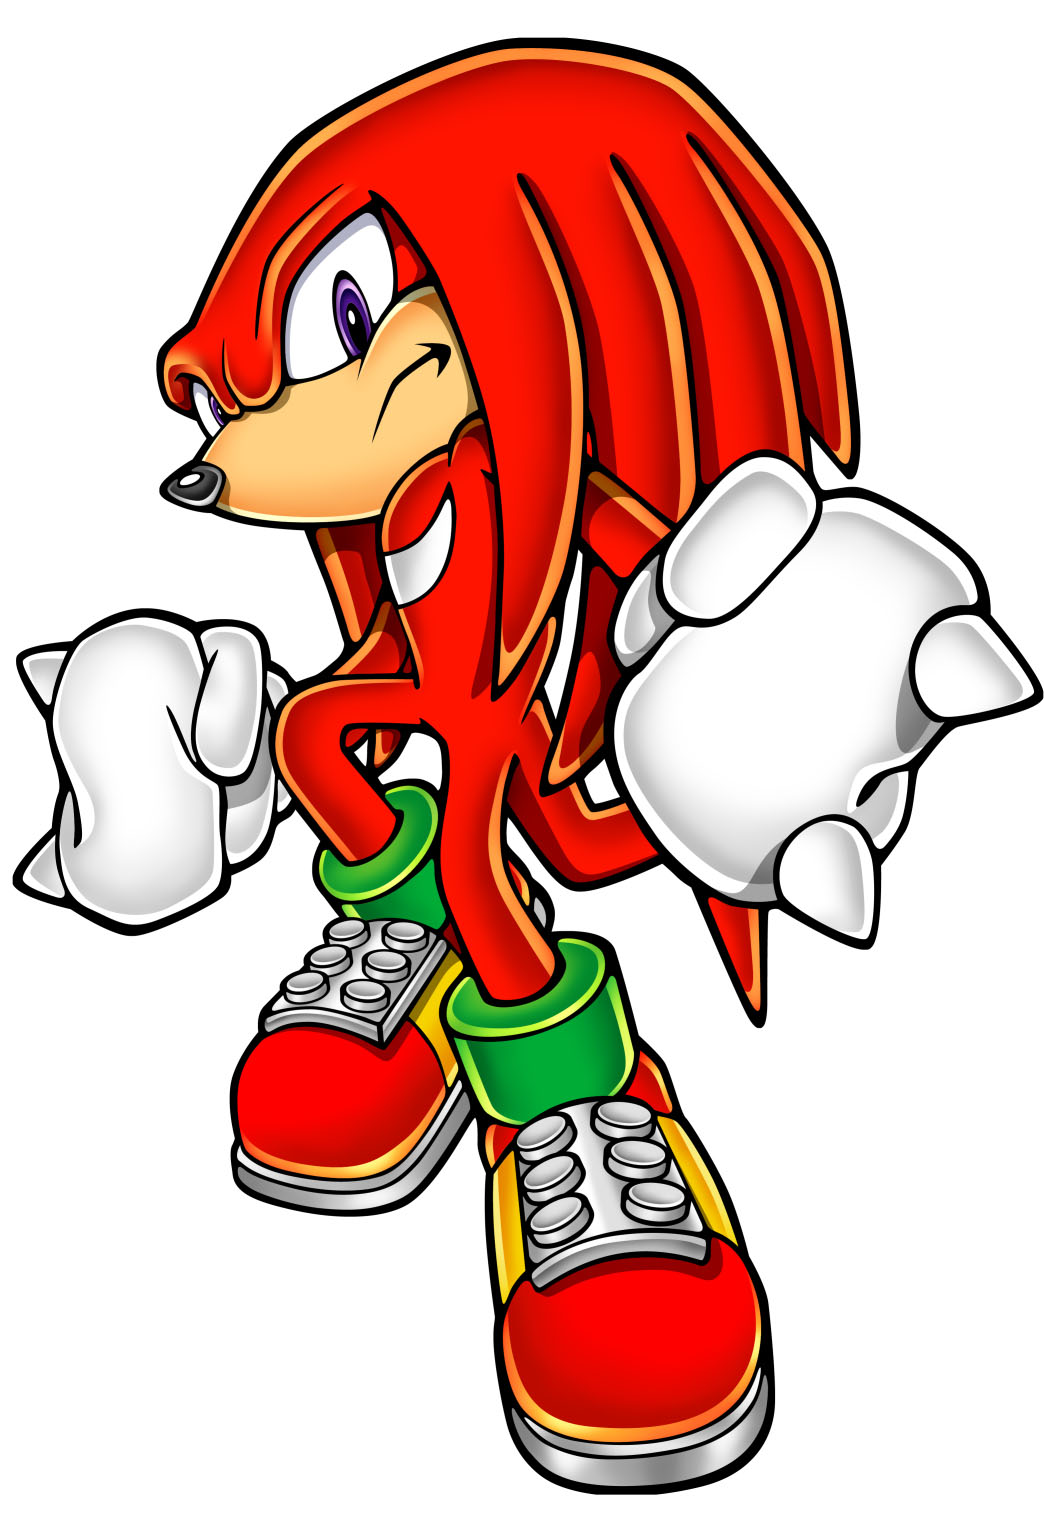 knuckles-the-echidna-from-the-sonic-series-game-art-hq